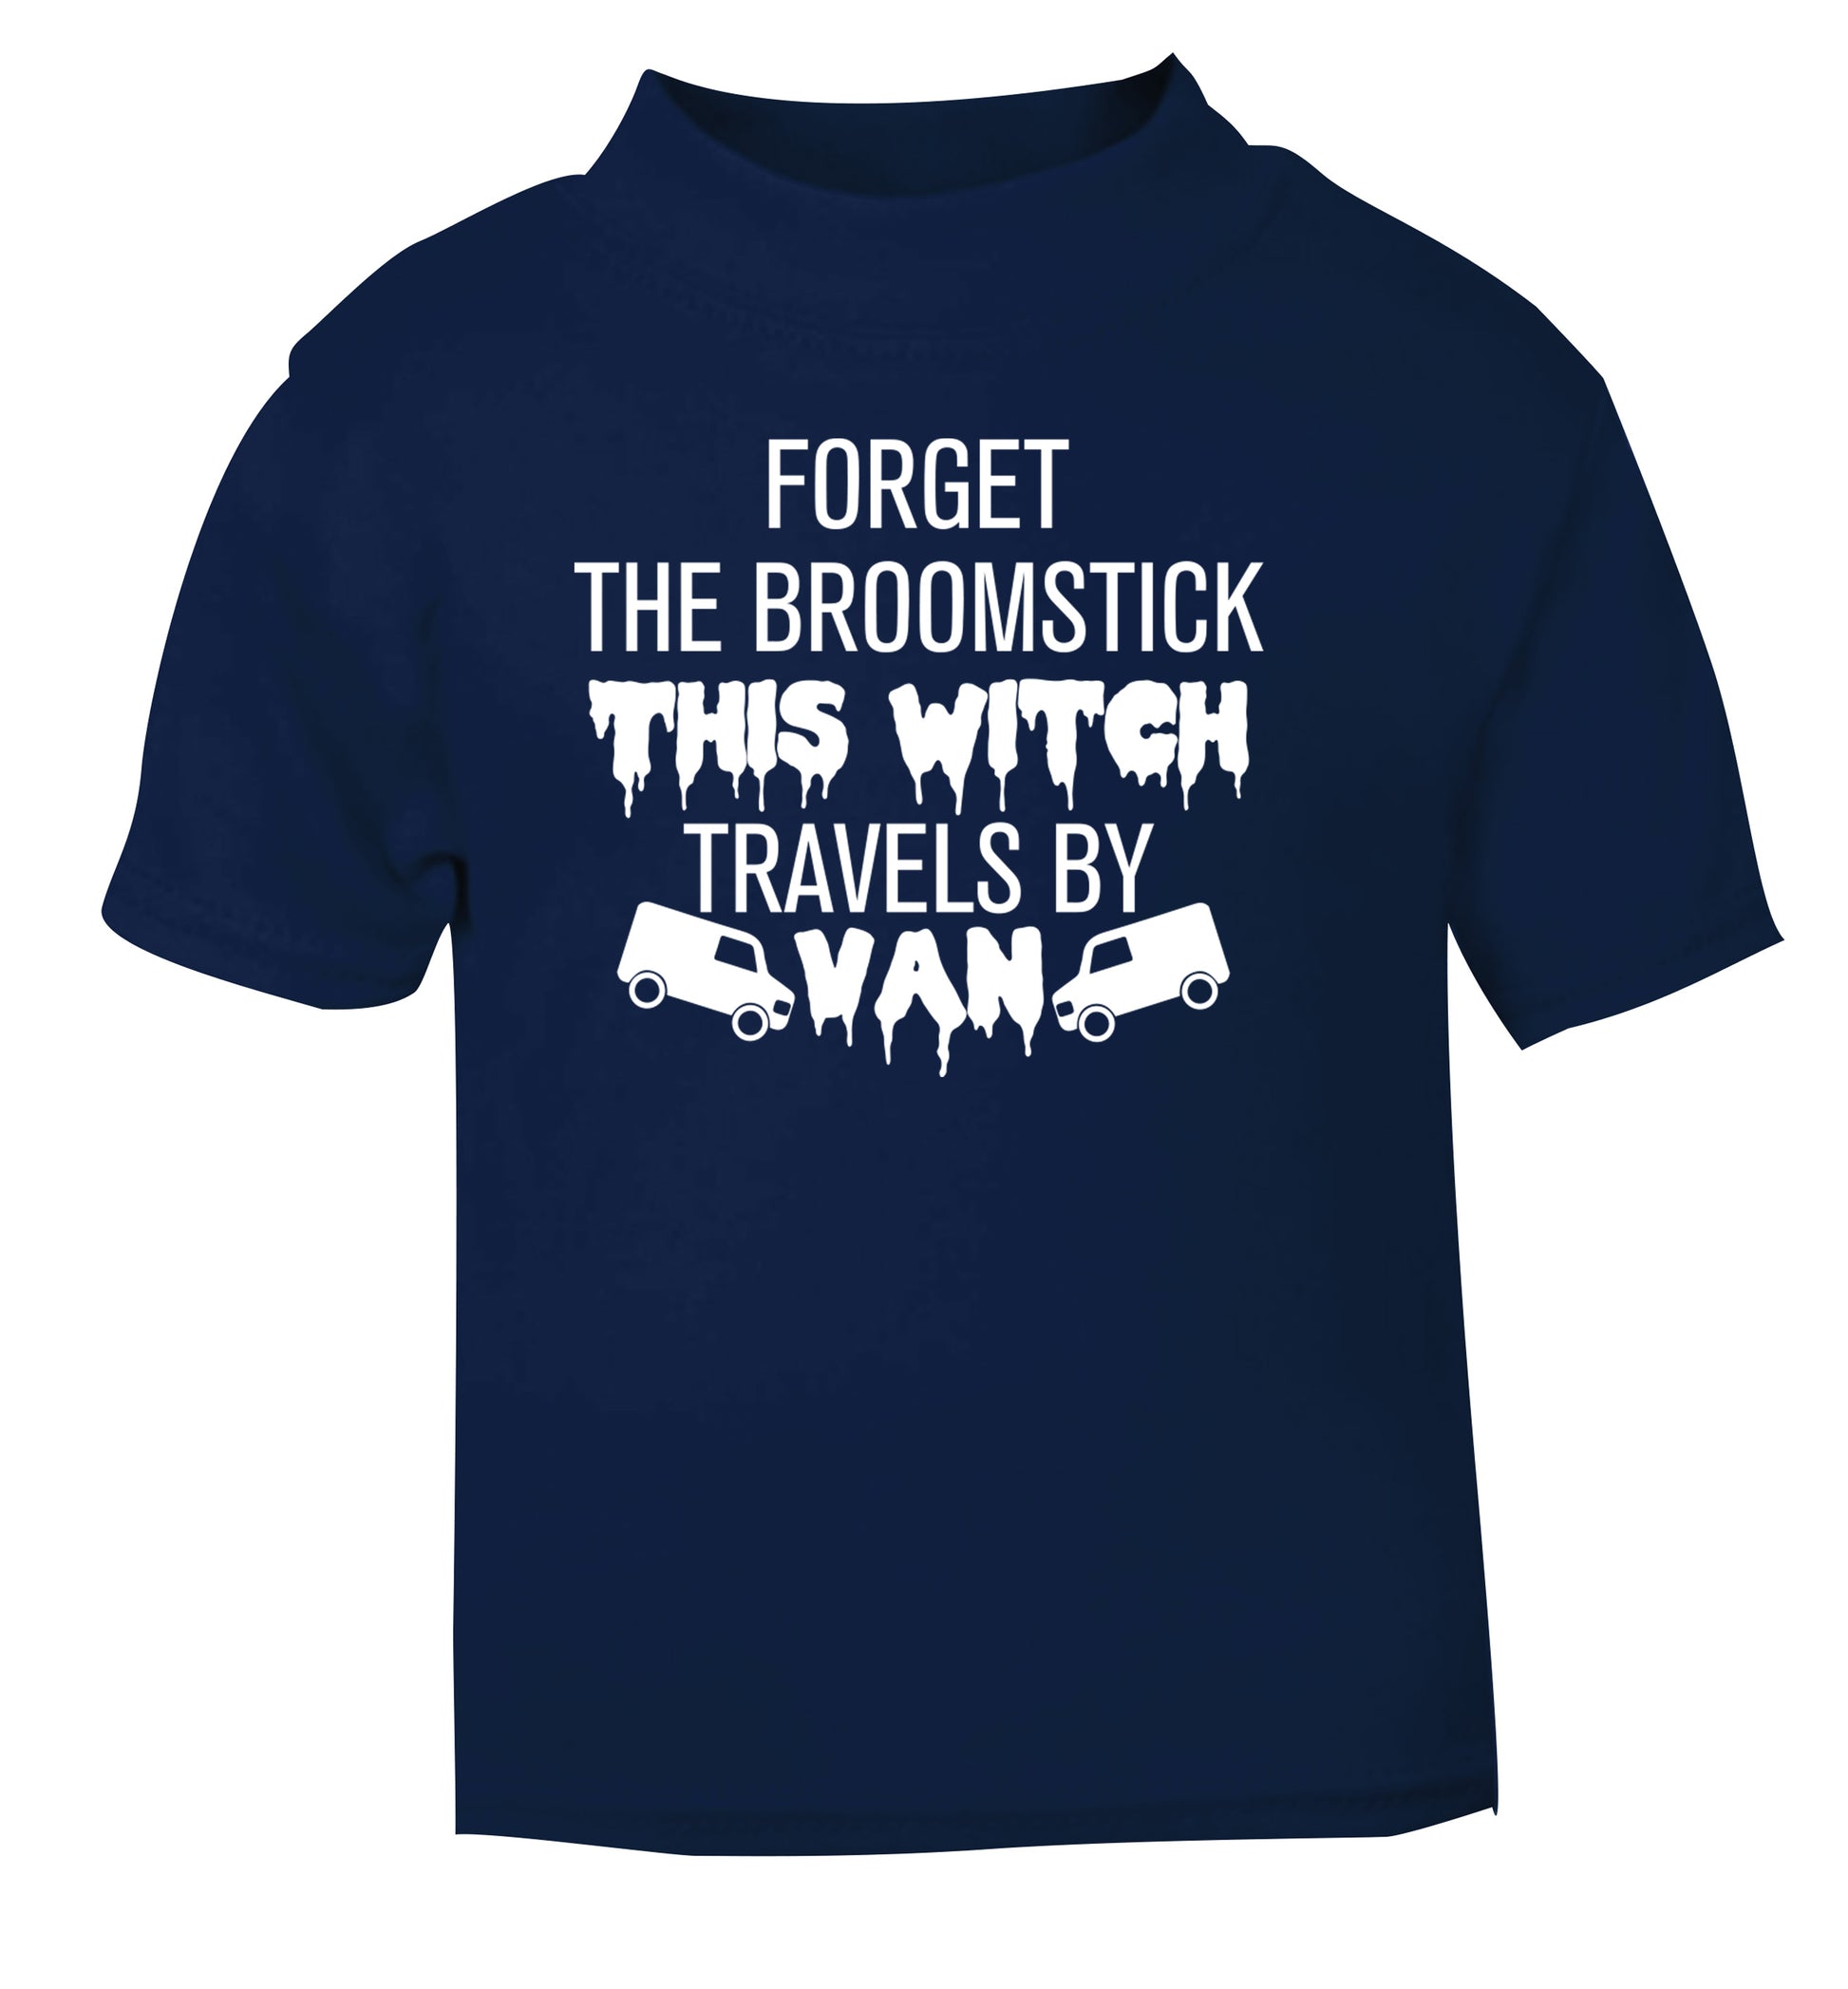 Forget the broomstick this witch travels by van navy Baby Toddler Tshirt 2 Years